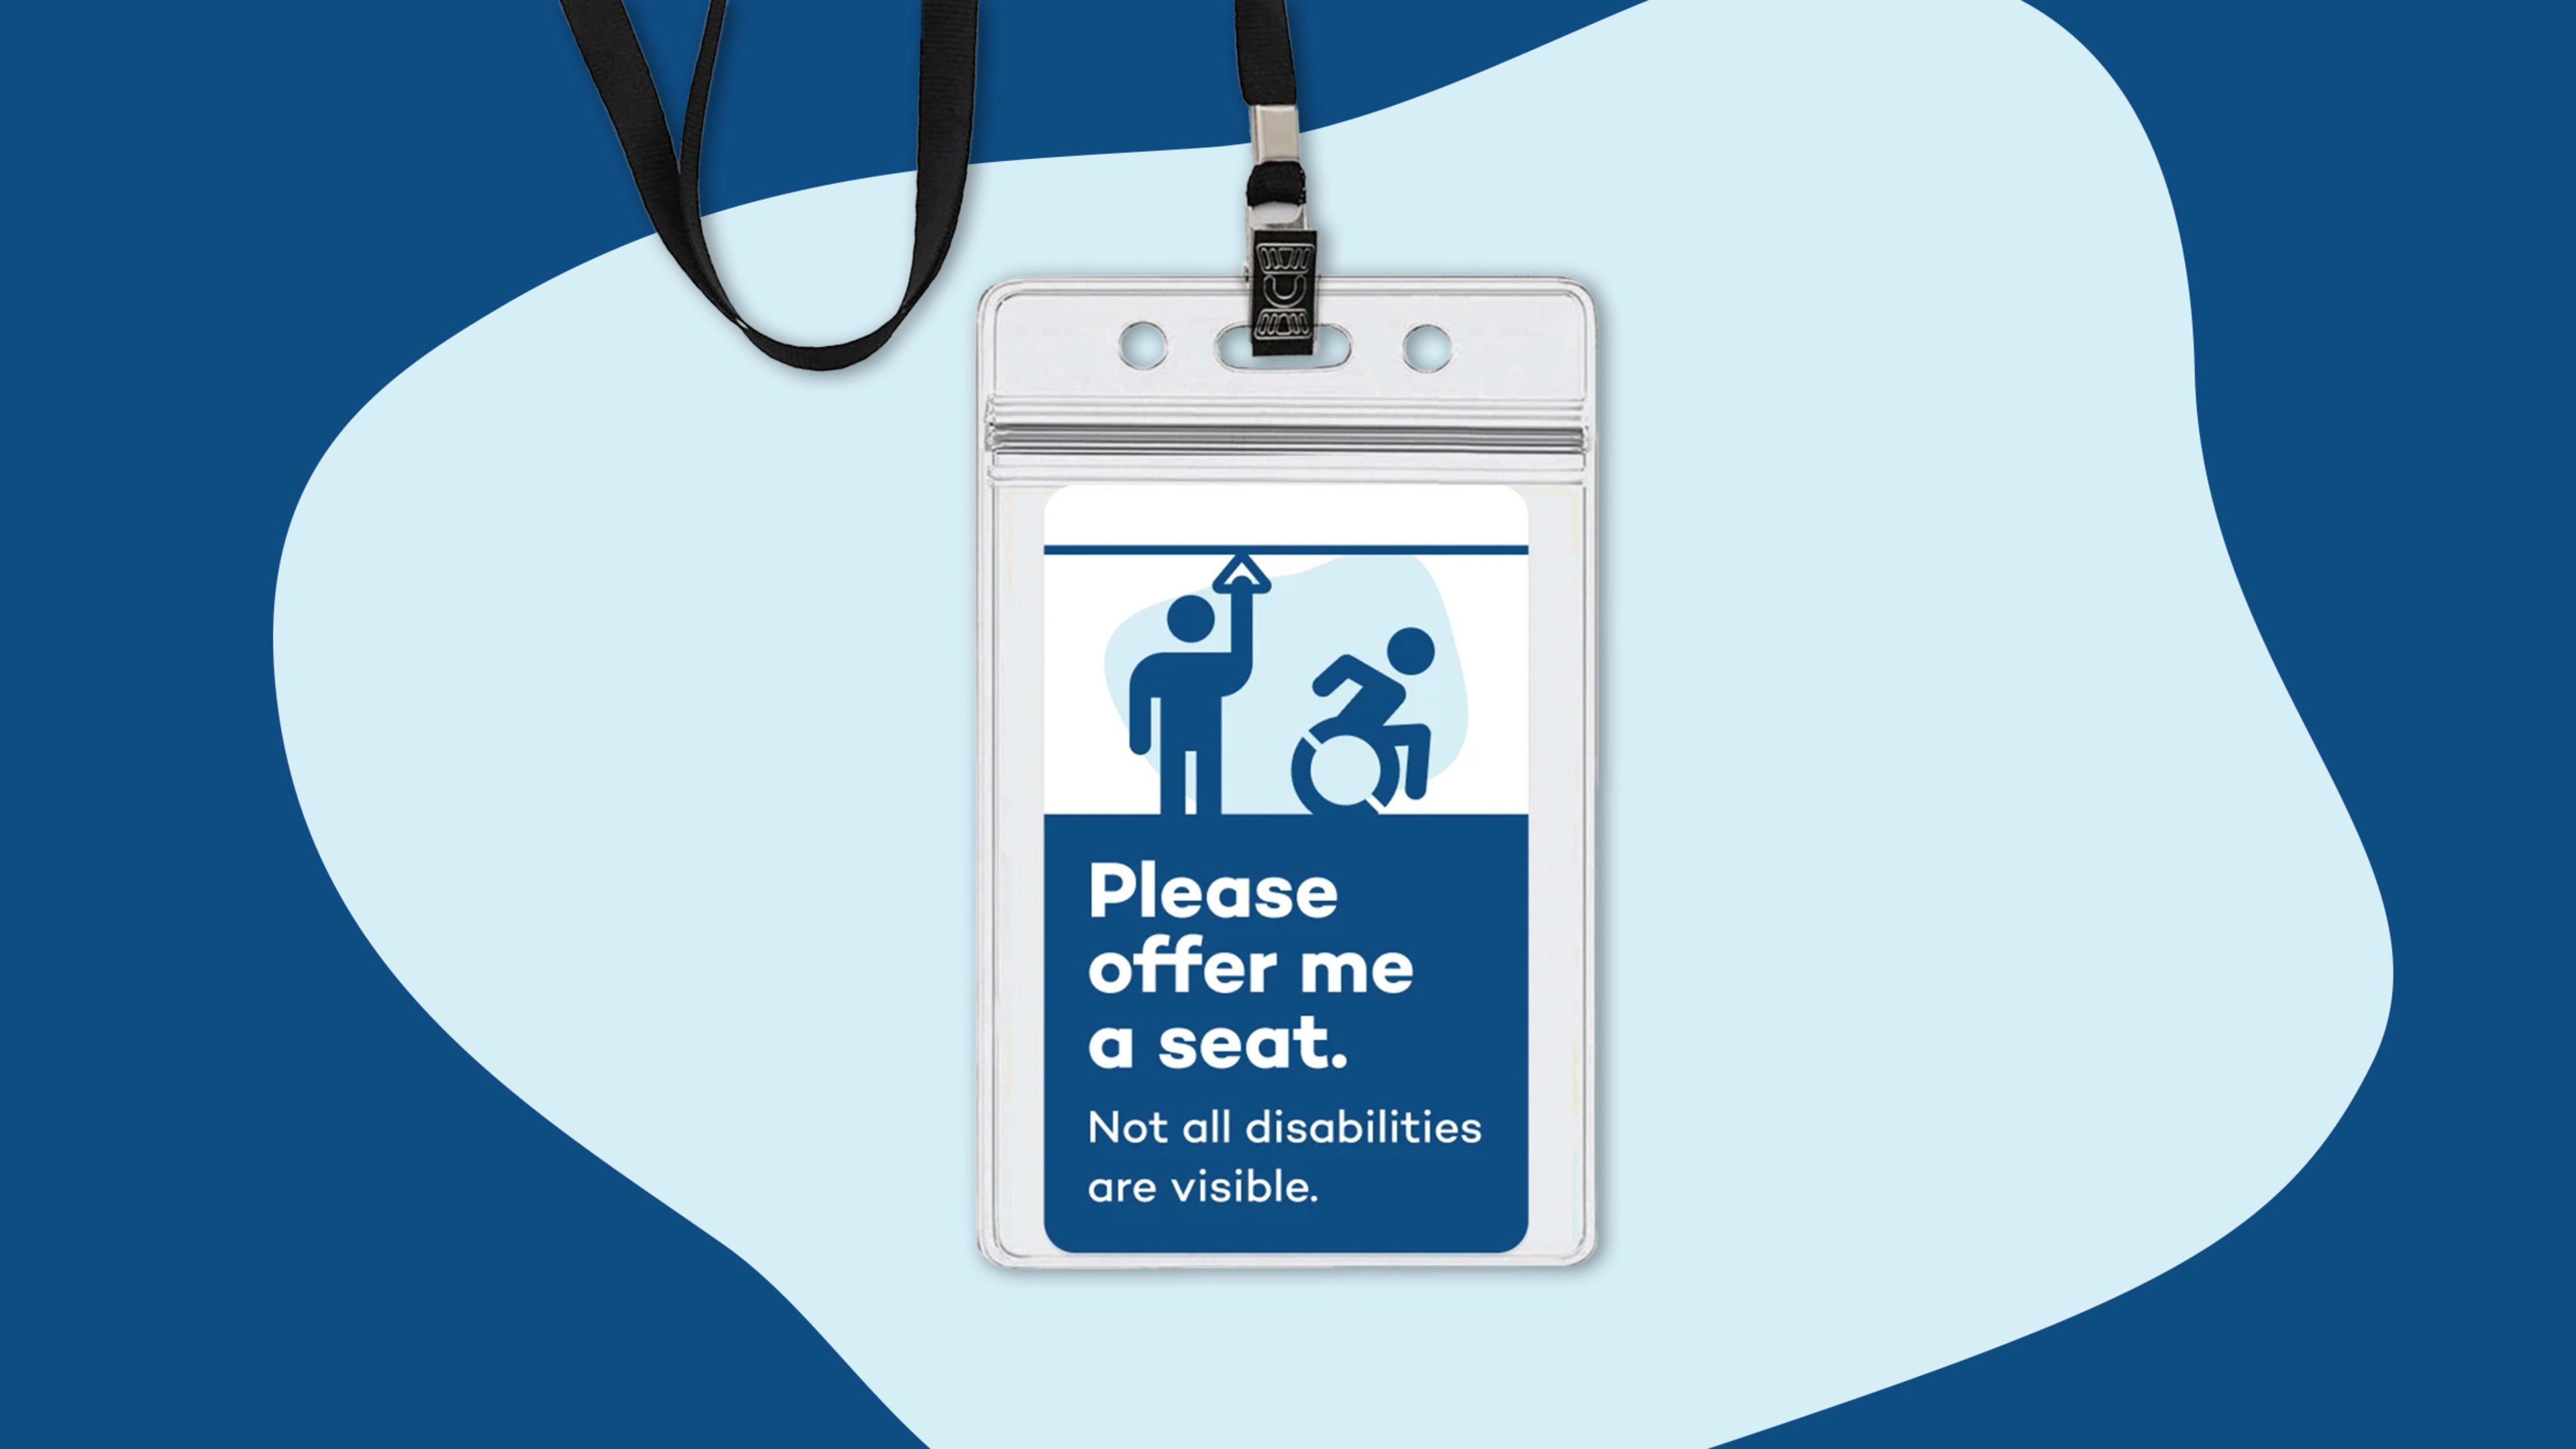 These stickers help people with less visible disabilities get a seat on public transit